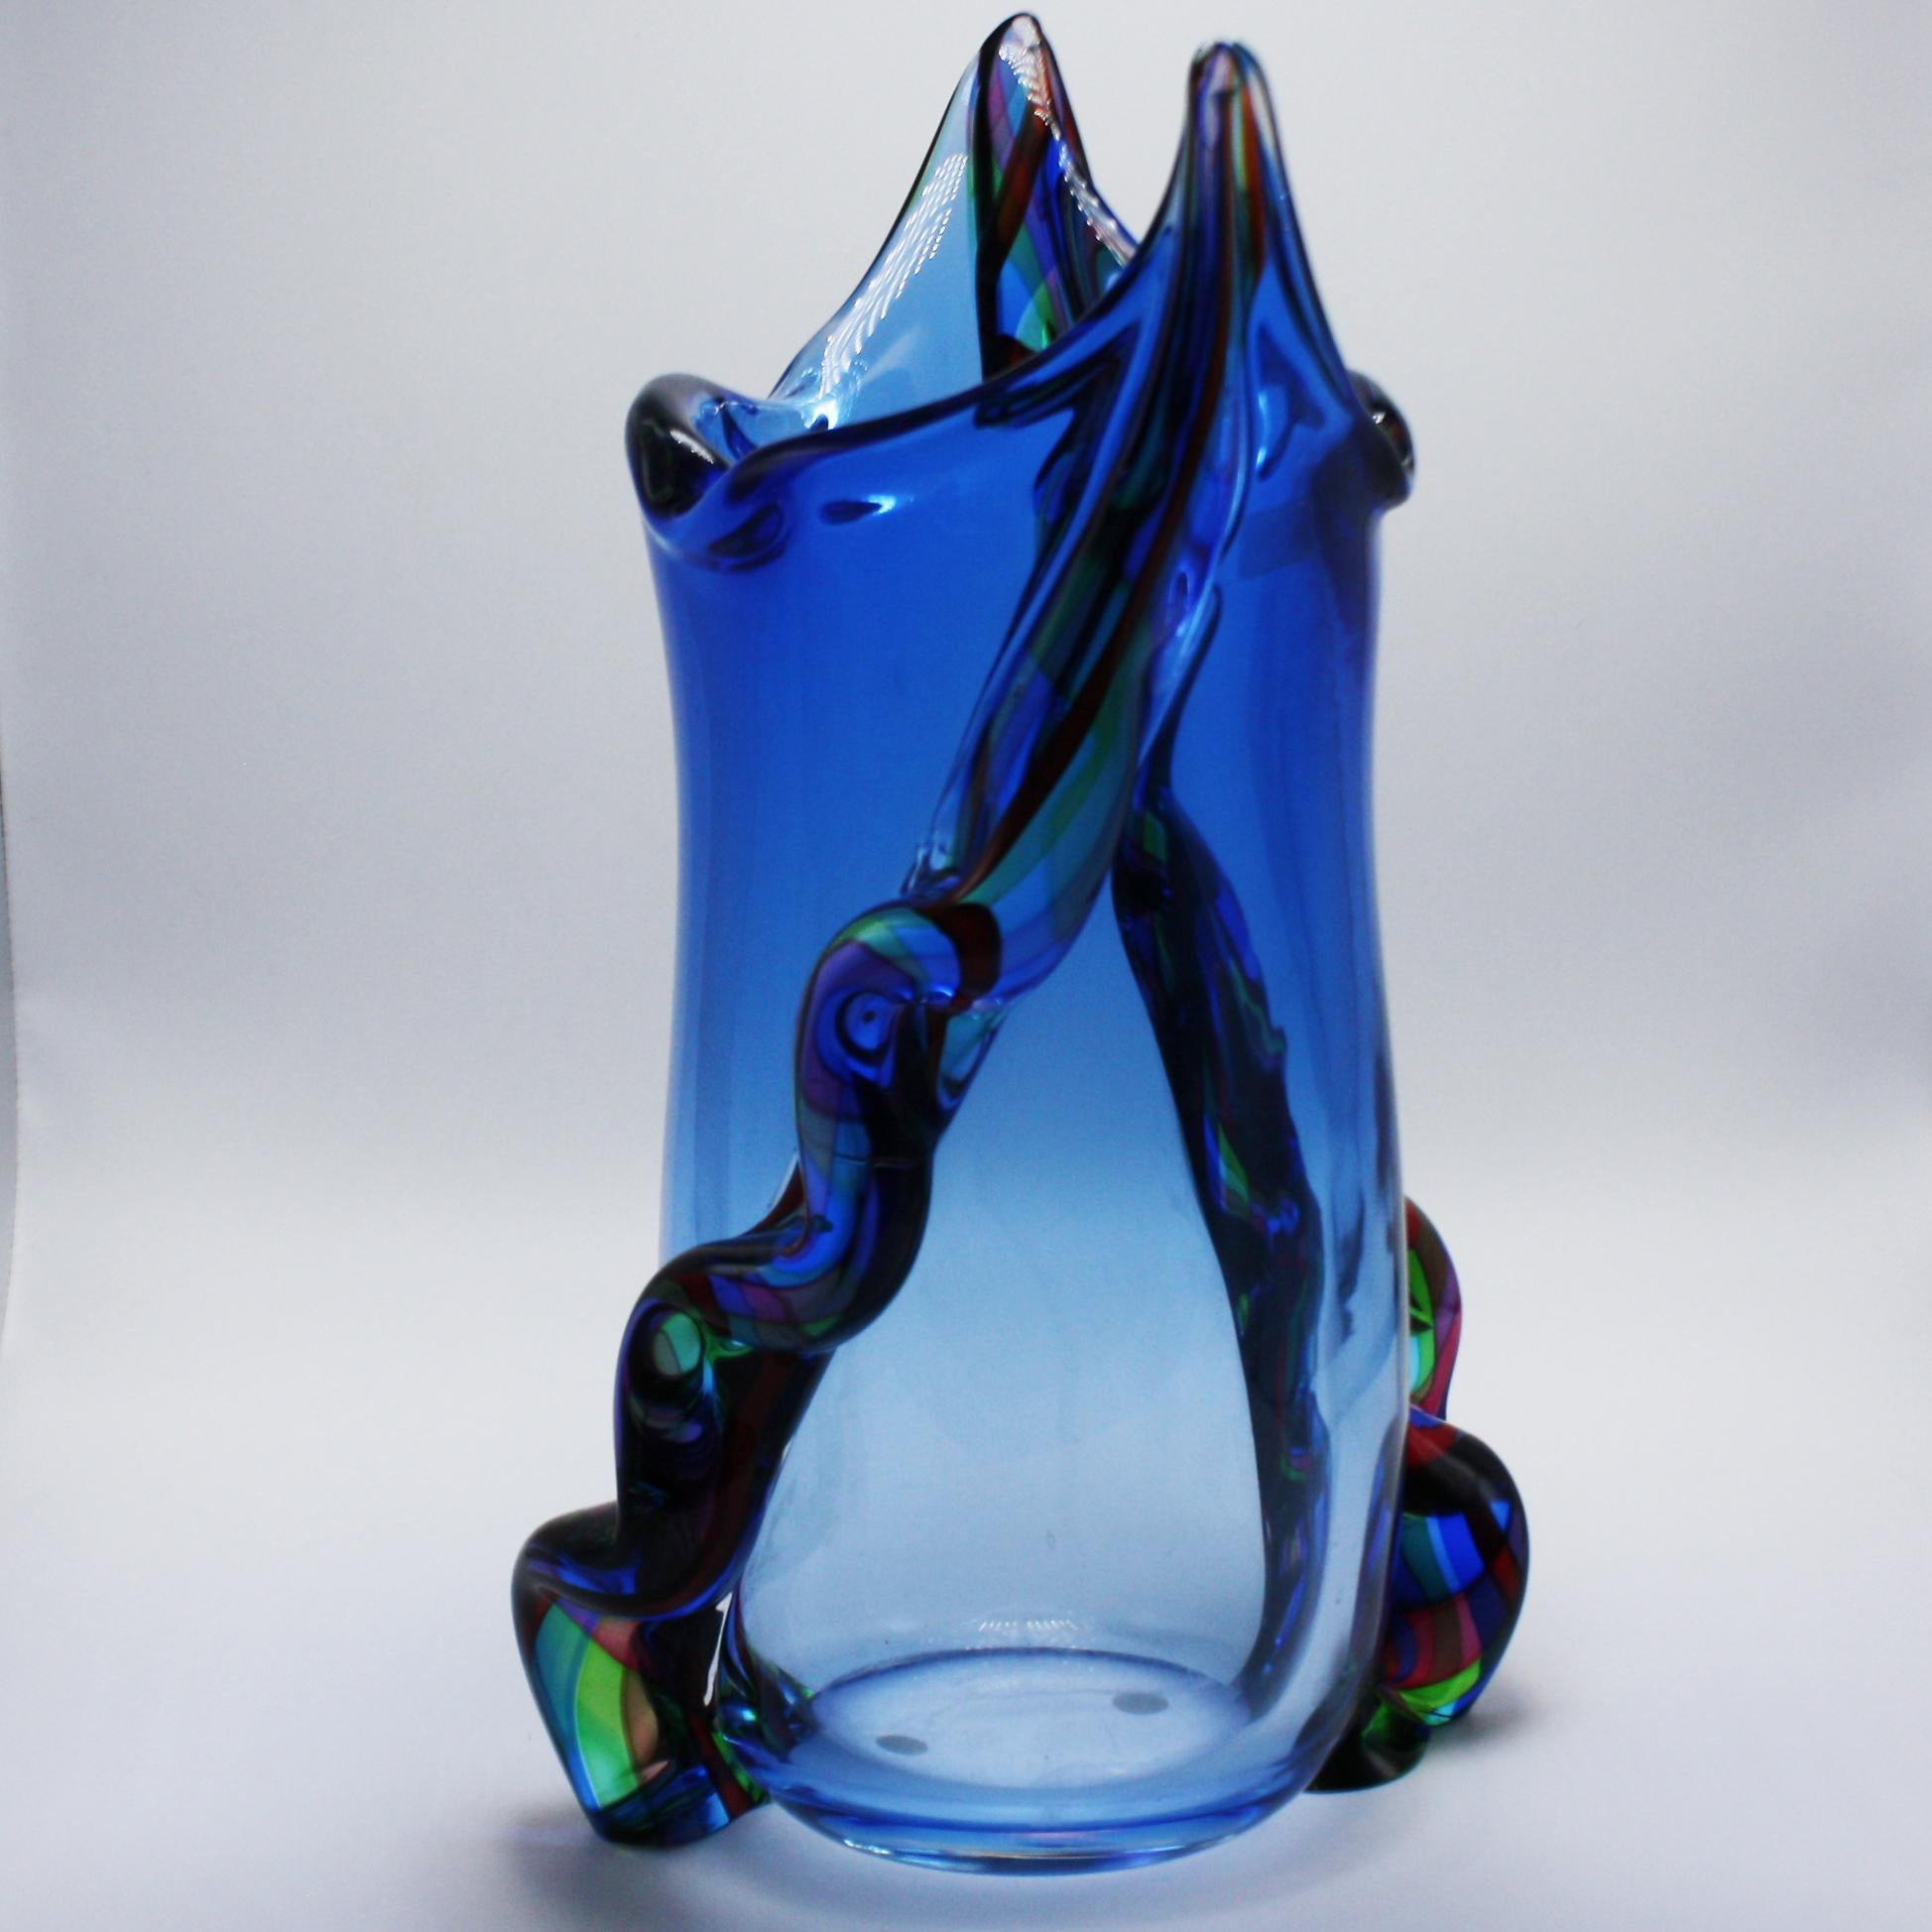 Late 20th Century Large Blue Murano Vase with Multicolored Detailing, c. 1970